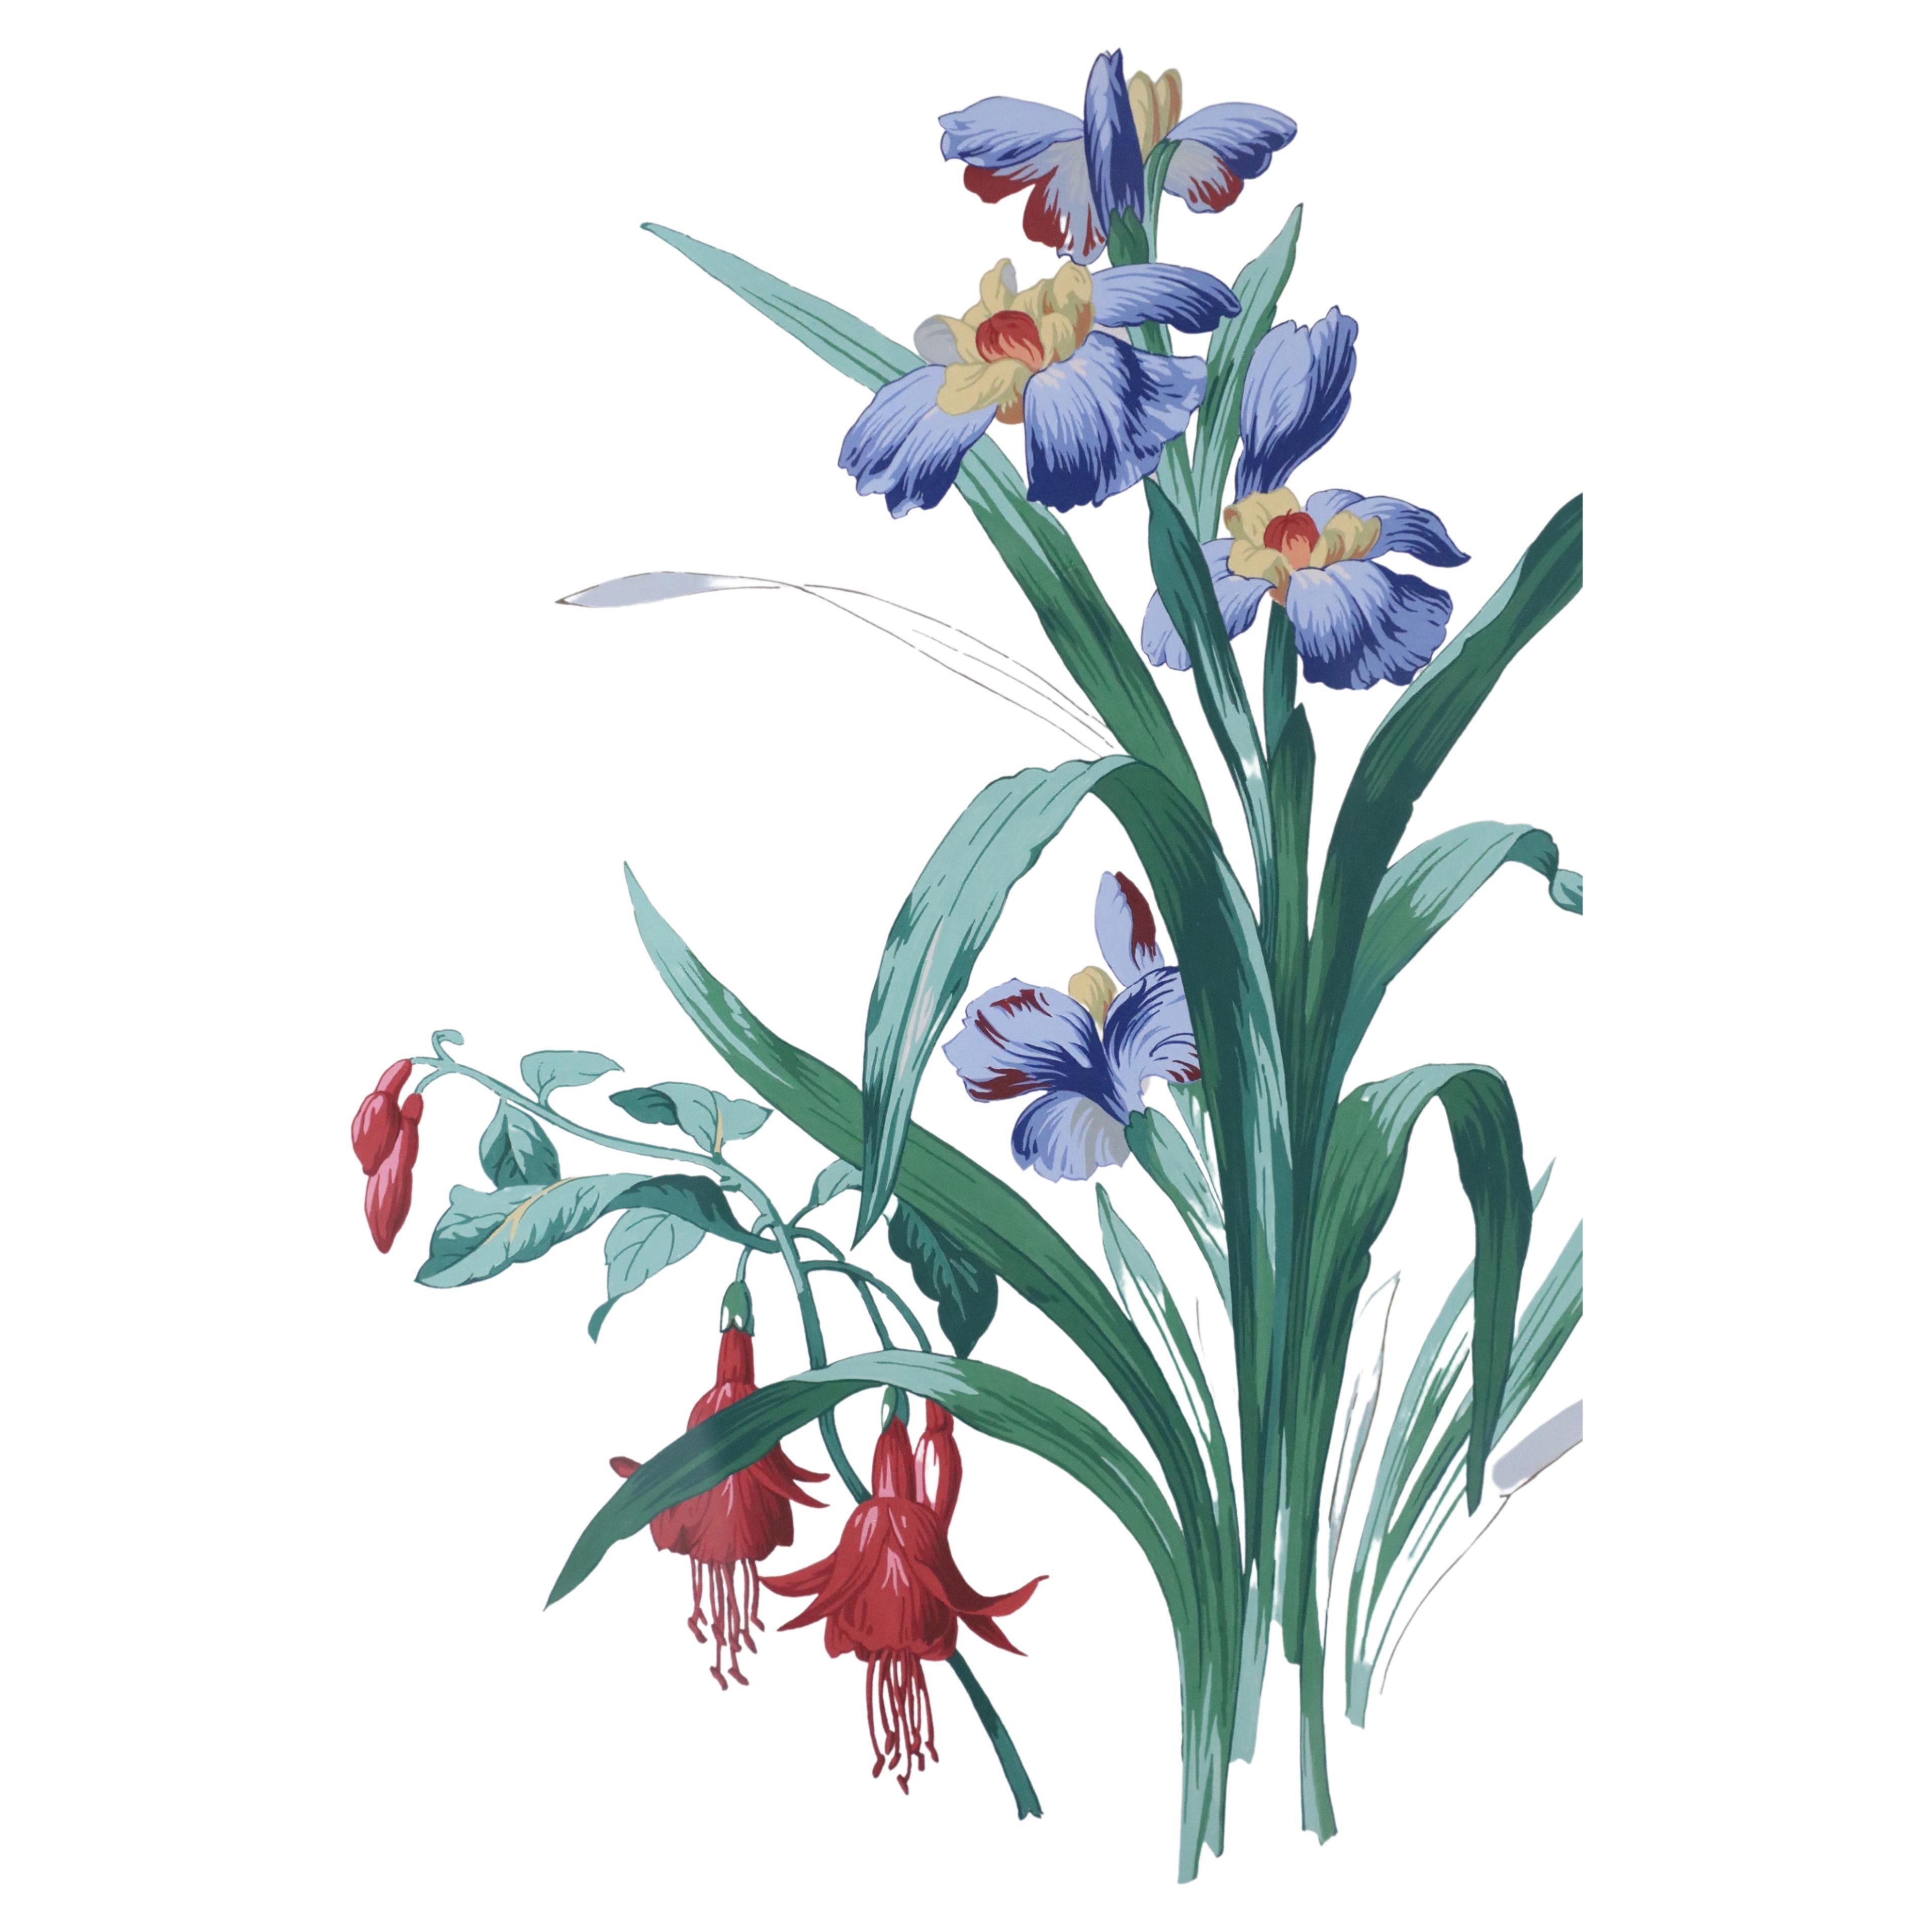 Mid-century illustration / watercolor of a bouquet of blue and yellow irises in a burgundy and light blue double mat and a rectangular giltwood frame.
     